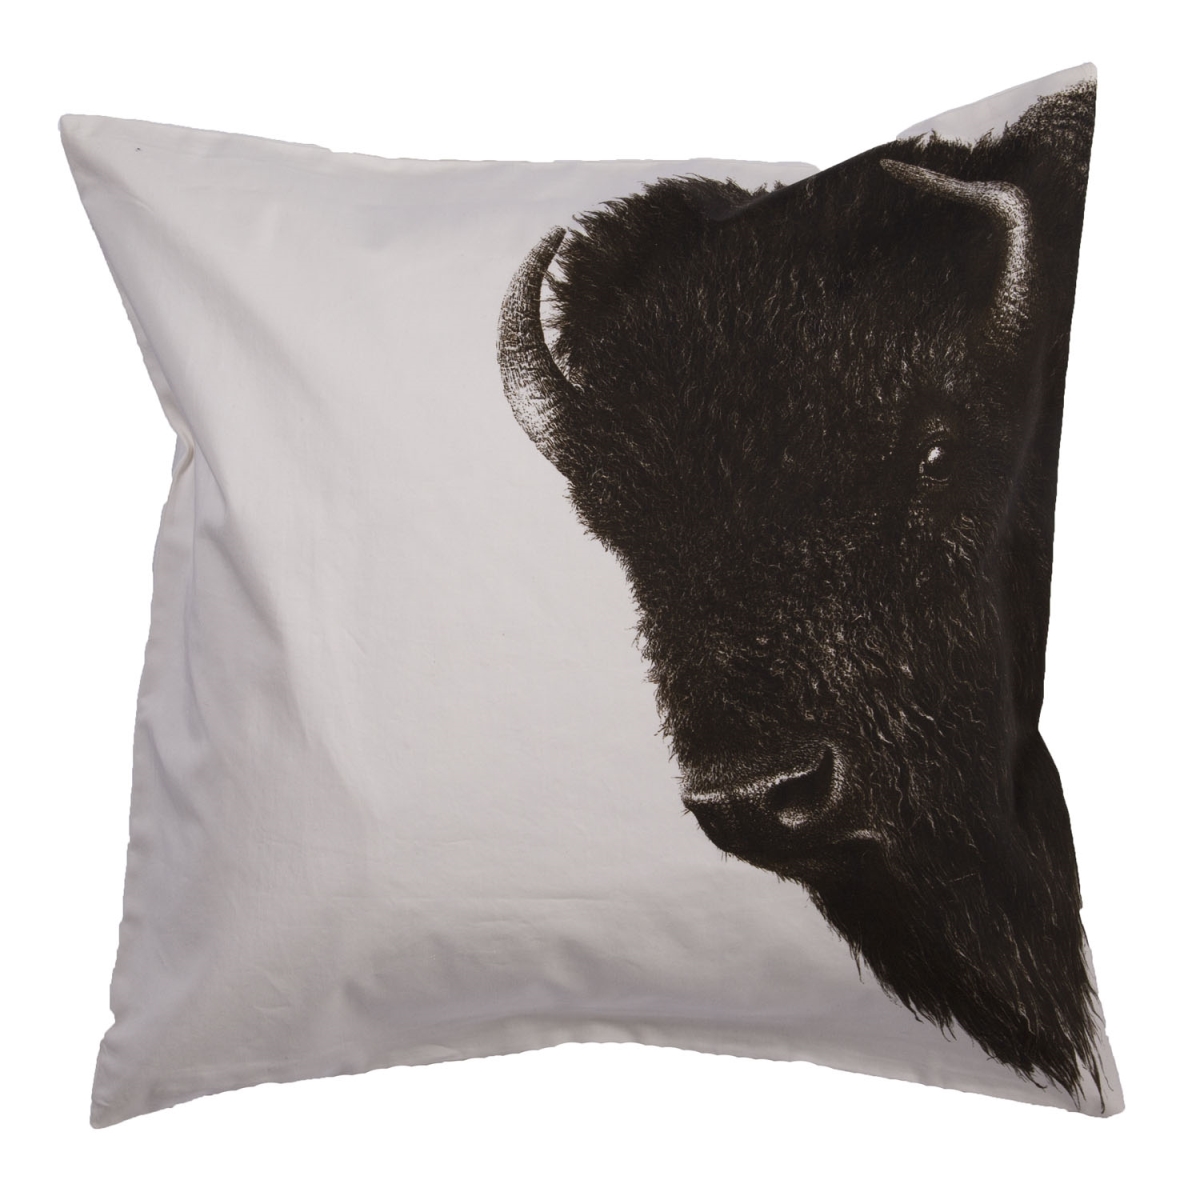 Plw102429 20 X 20 In. National Geographic Home Collection Buffalo White & Black Animal Poly Throw Pillow